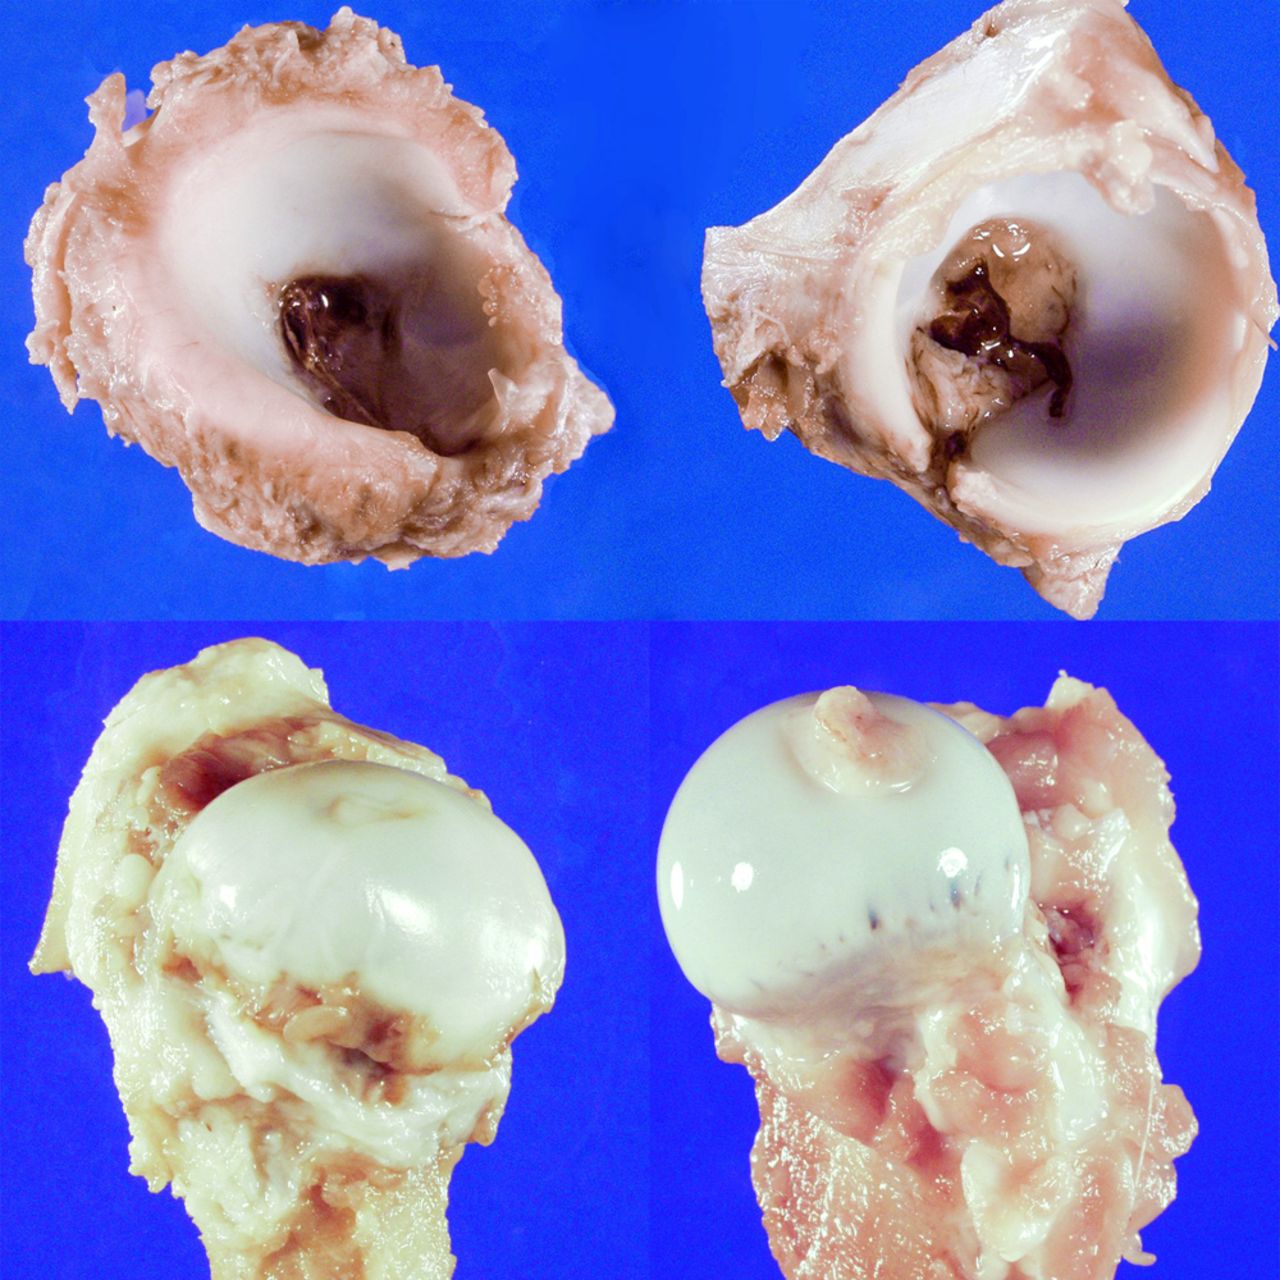 Fig. 2 
          Top: photographs show operated side
acetabulum on the left and non-operated side on the right. Note
well defined outer rim on normal side and flattened rim with wider
opening on operated side. Below, the corresponding femoral heads
are shown. The femoral head and neck with avascular necrosis (AVN)
shows flatter, wider head with shorter neck and more prominent greater trochanter.
        